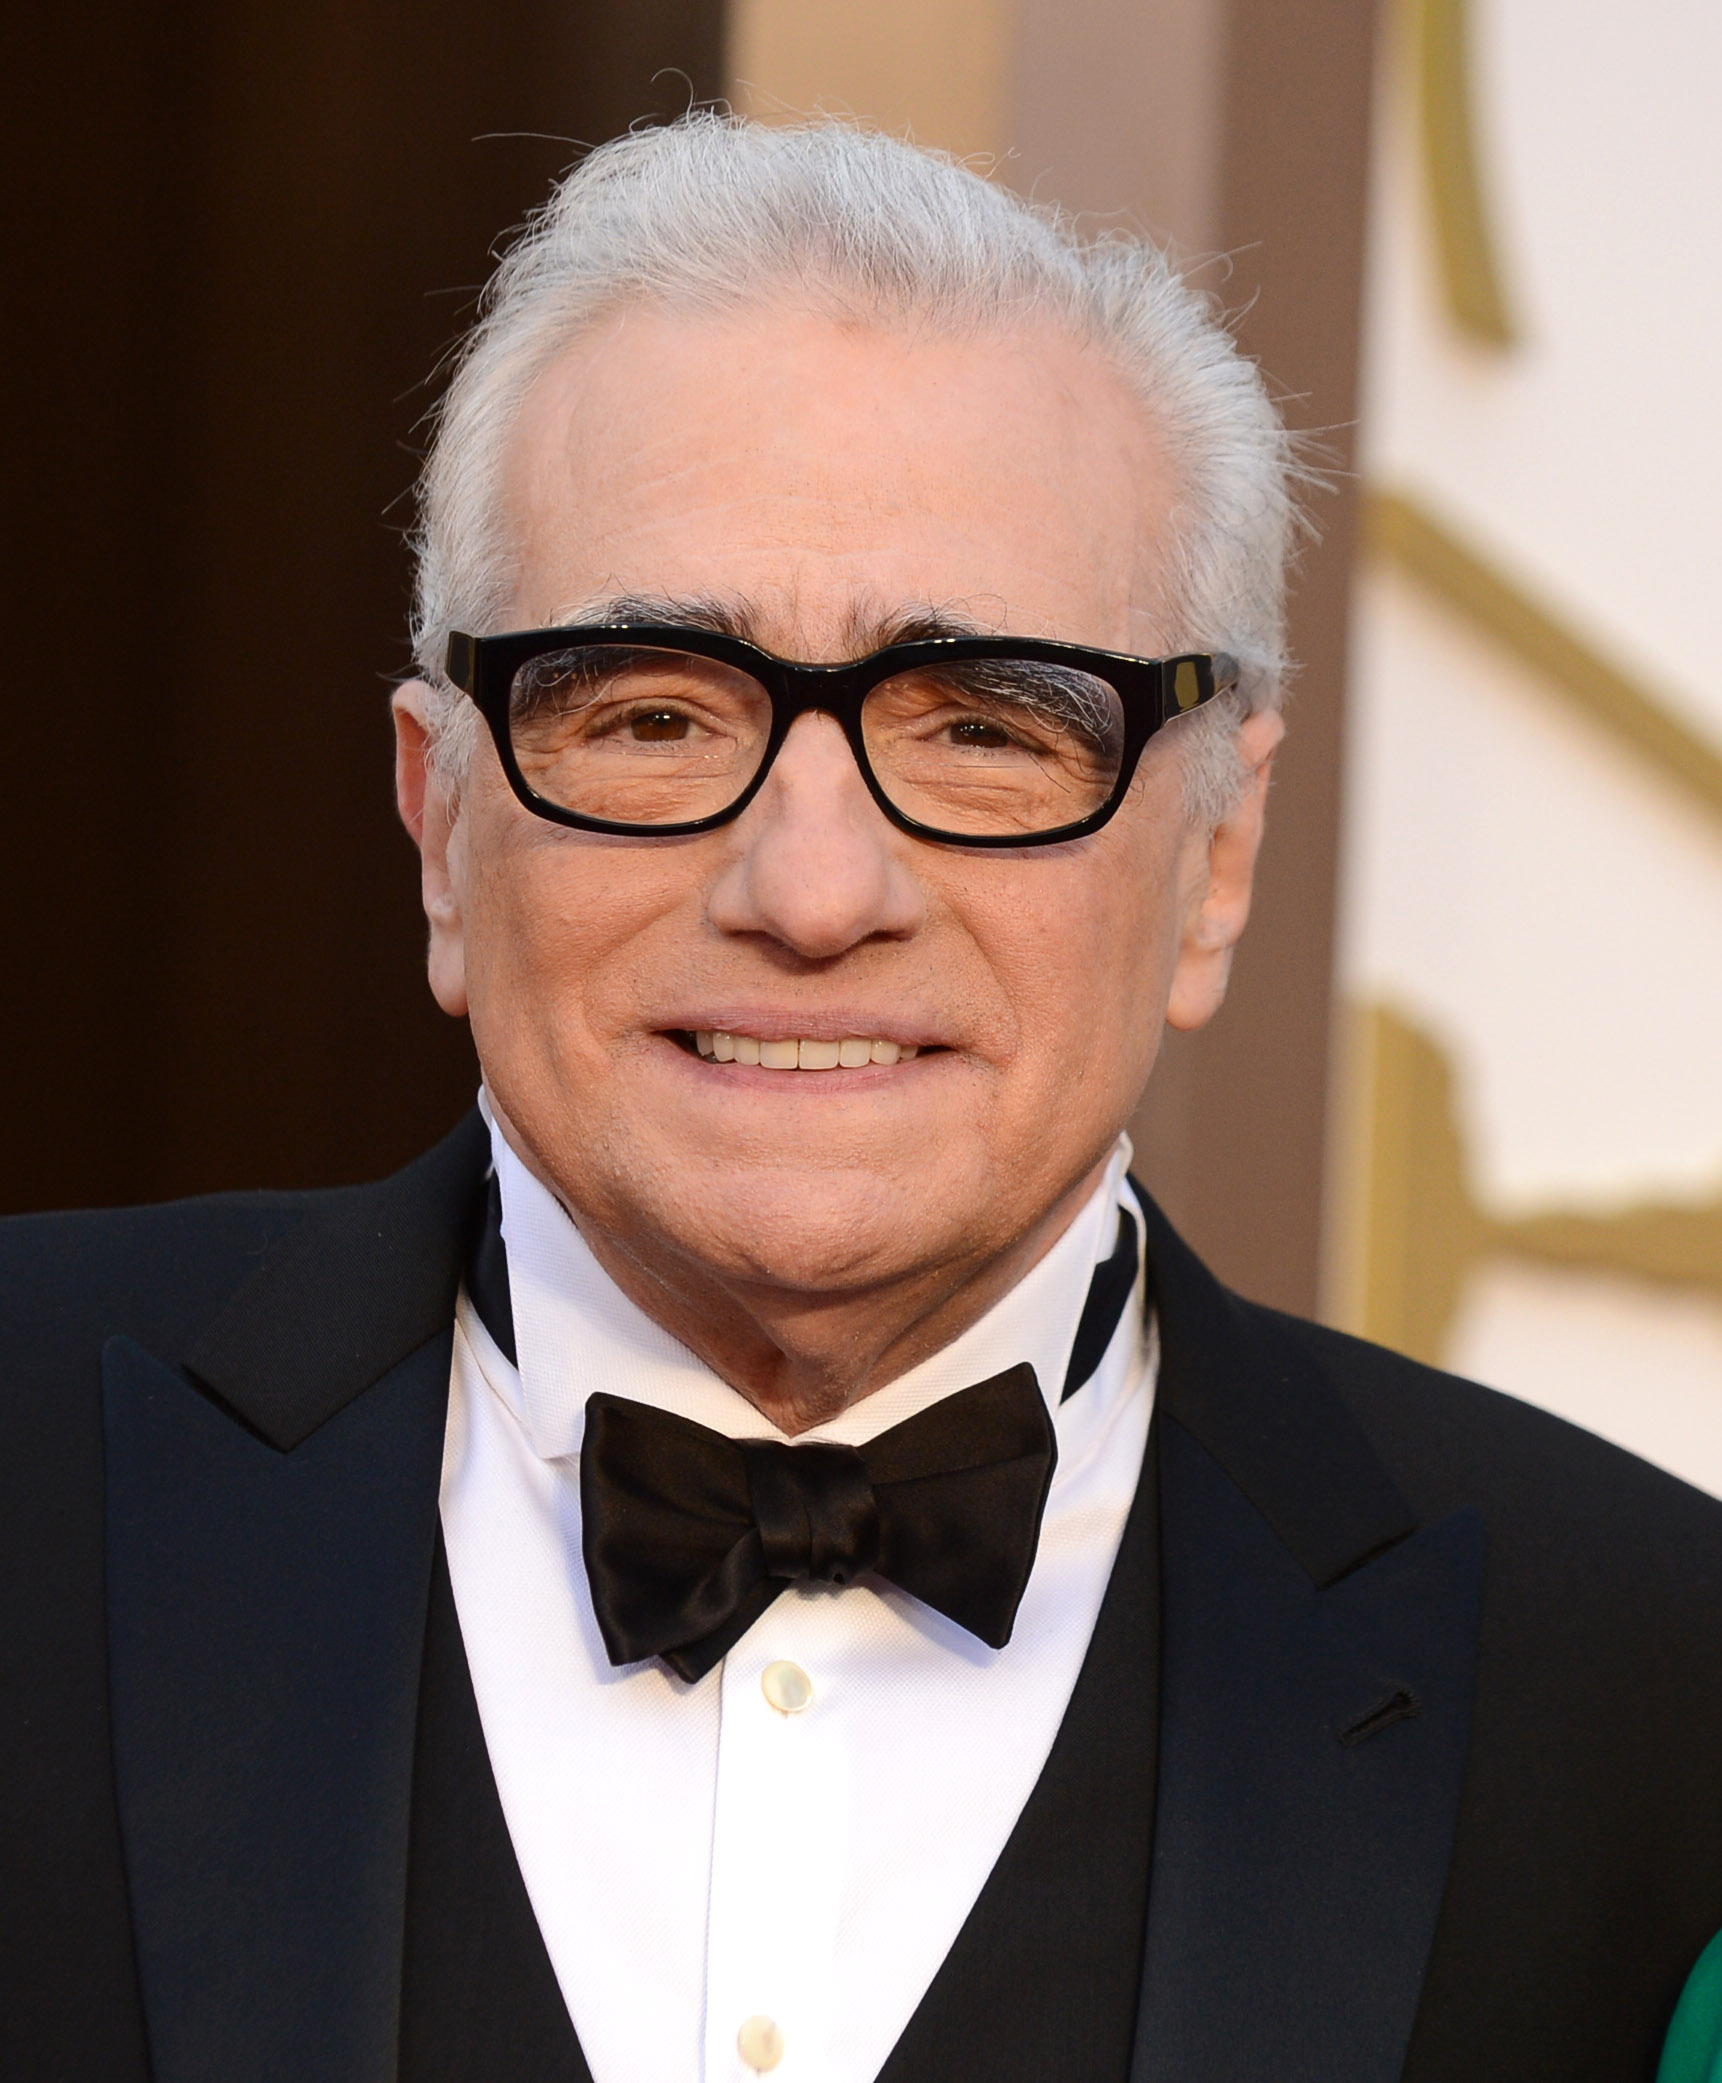 Martin Scorsese arrives at the Oscars on March 2, 2014, at the Dolby Theatre in Los Angeles. (Jordan Strauss—Invision/AP)